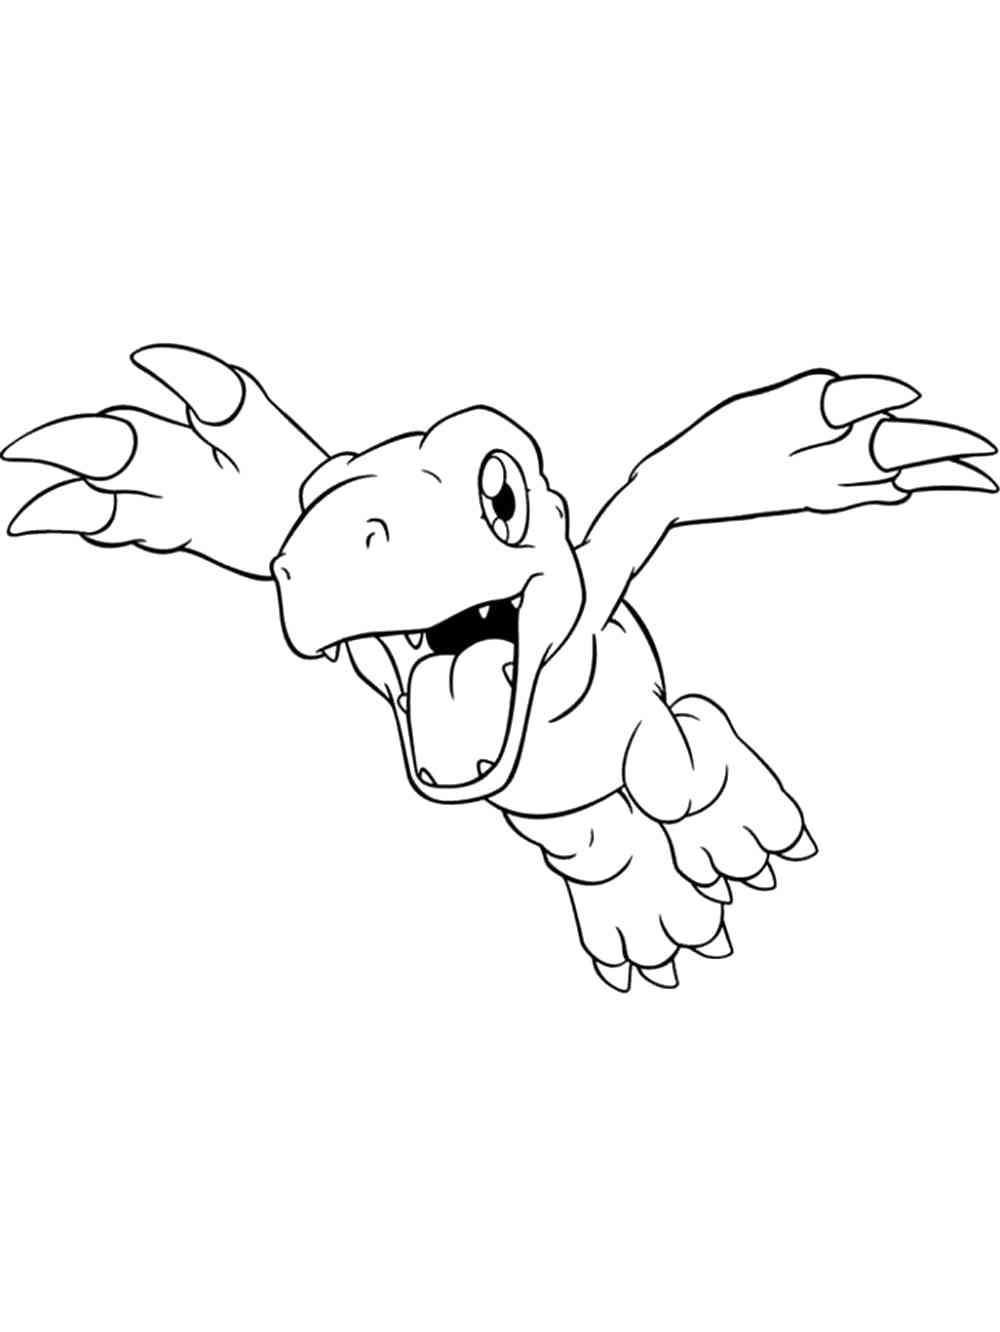 Digimon 4 coloring page